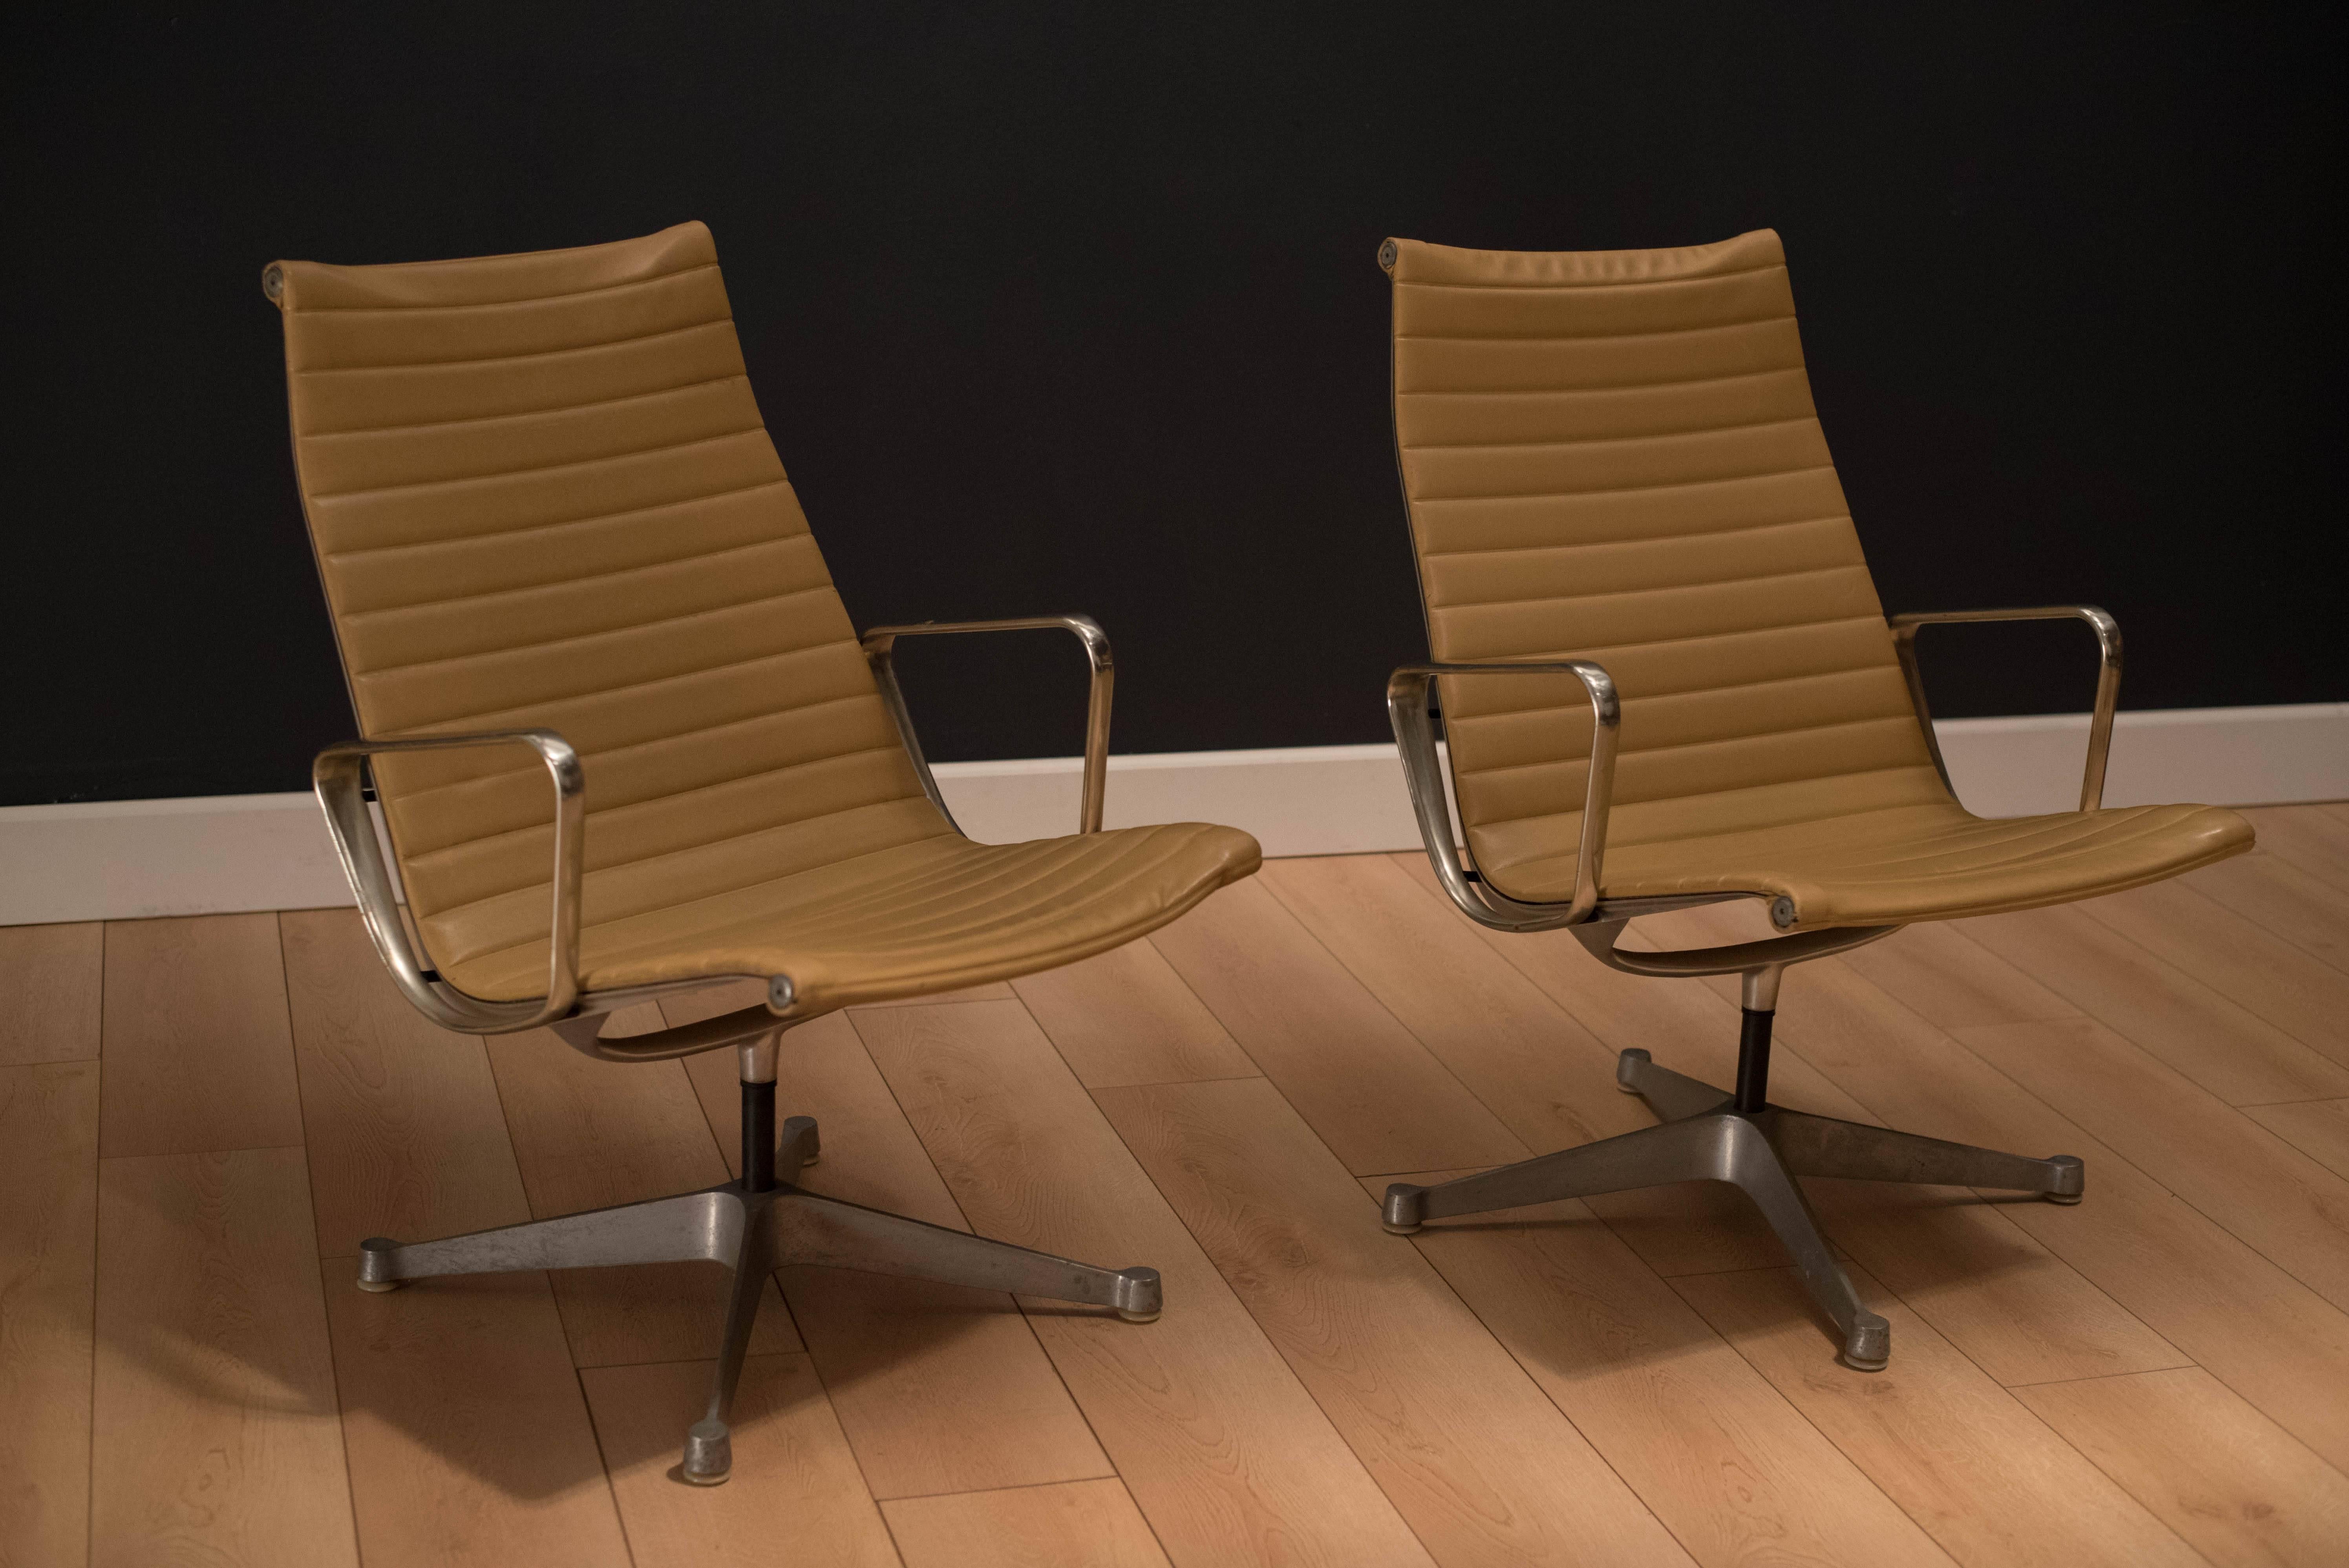 Mid Century Aluminum Group swivel chairs designed by Charles and Ray Eames for Herman Miller. Original tan Naugahyde upholstery with aluminum arms. Two available, price is for each.
 